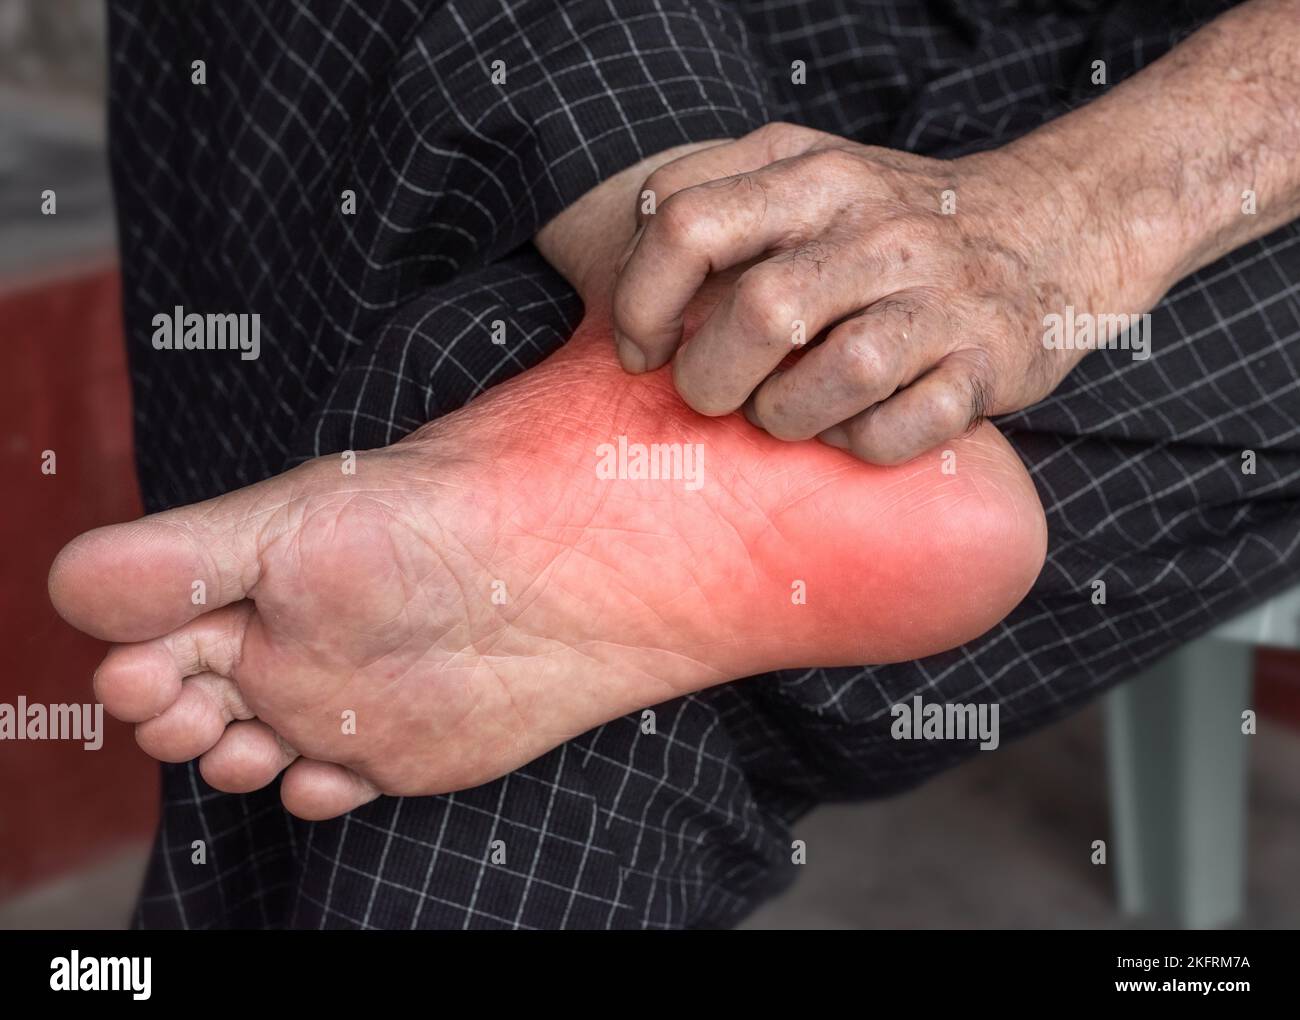 Itchy foot skin of Asian elder man. Concept of skin diseases such as scabies, fungal infection, eczema, psoriasis, rash, allergy, etc. Stock Photo